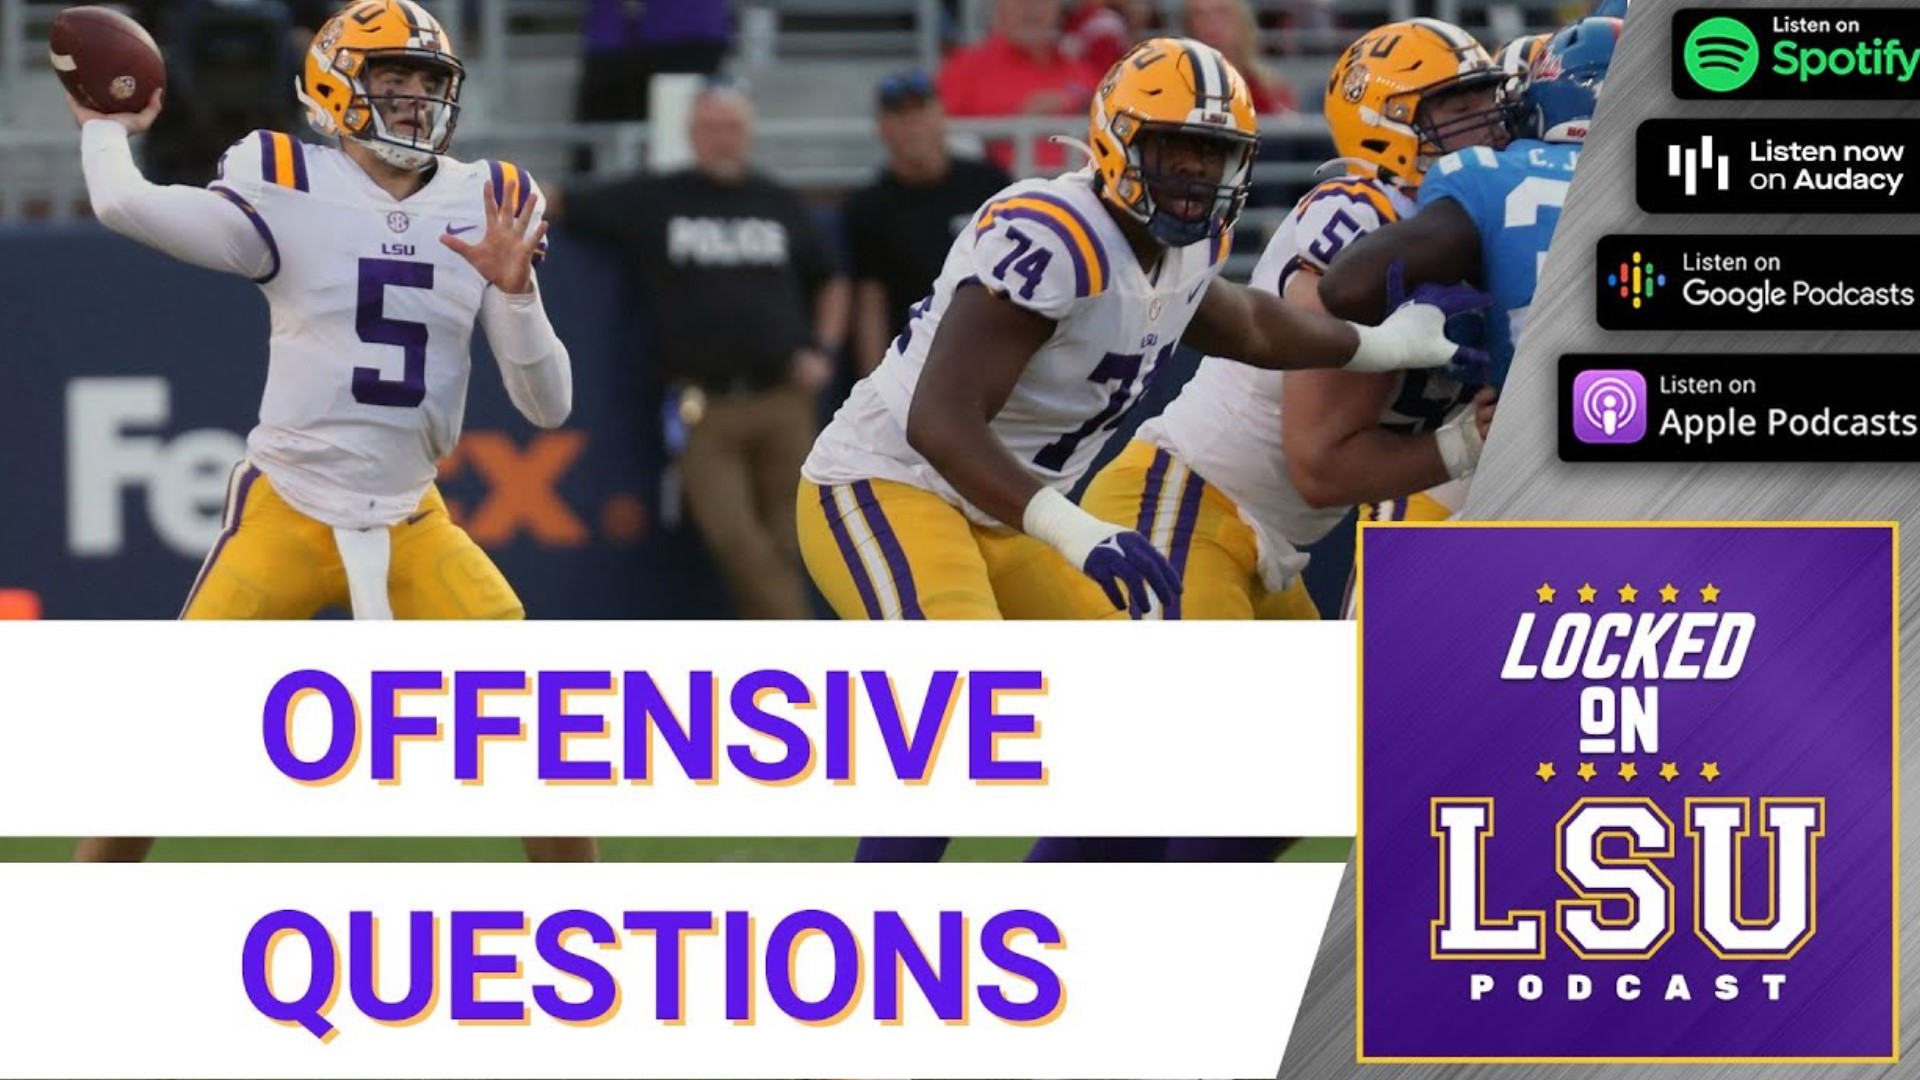 So what more have we learned about LSU's team and how it will look on September 4 in New Orleans?